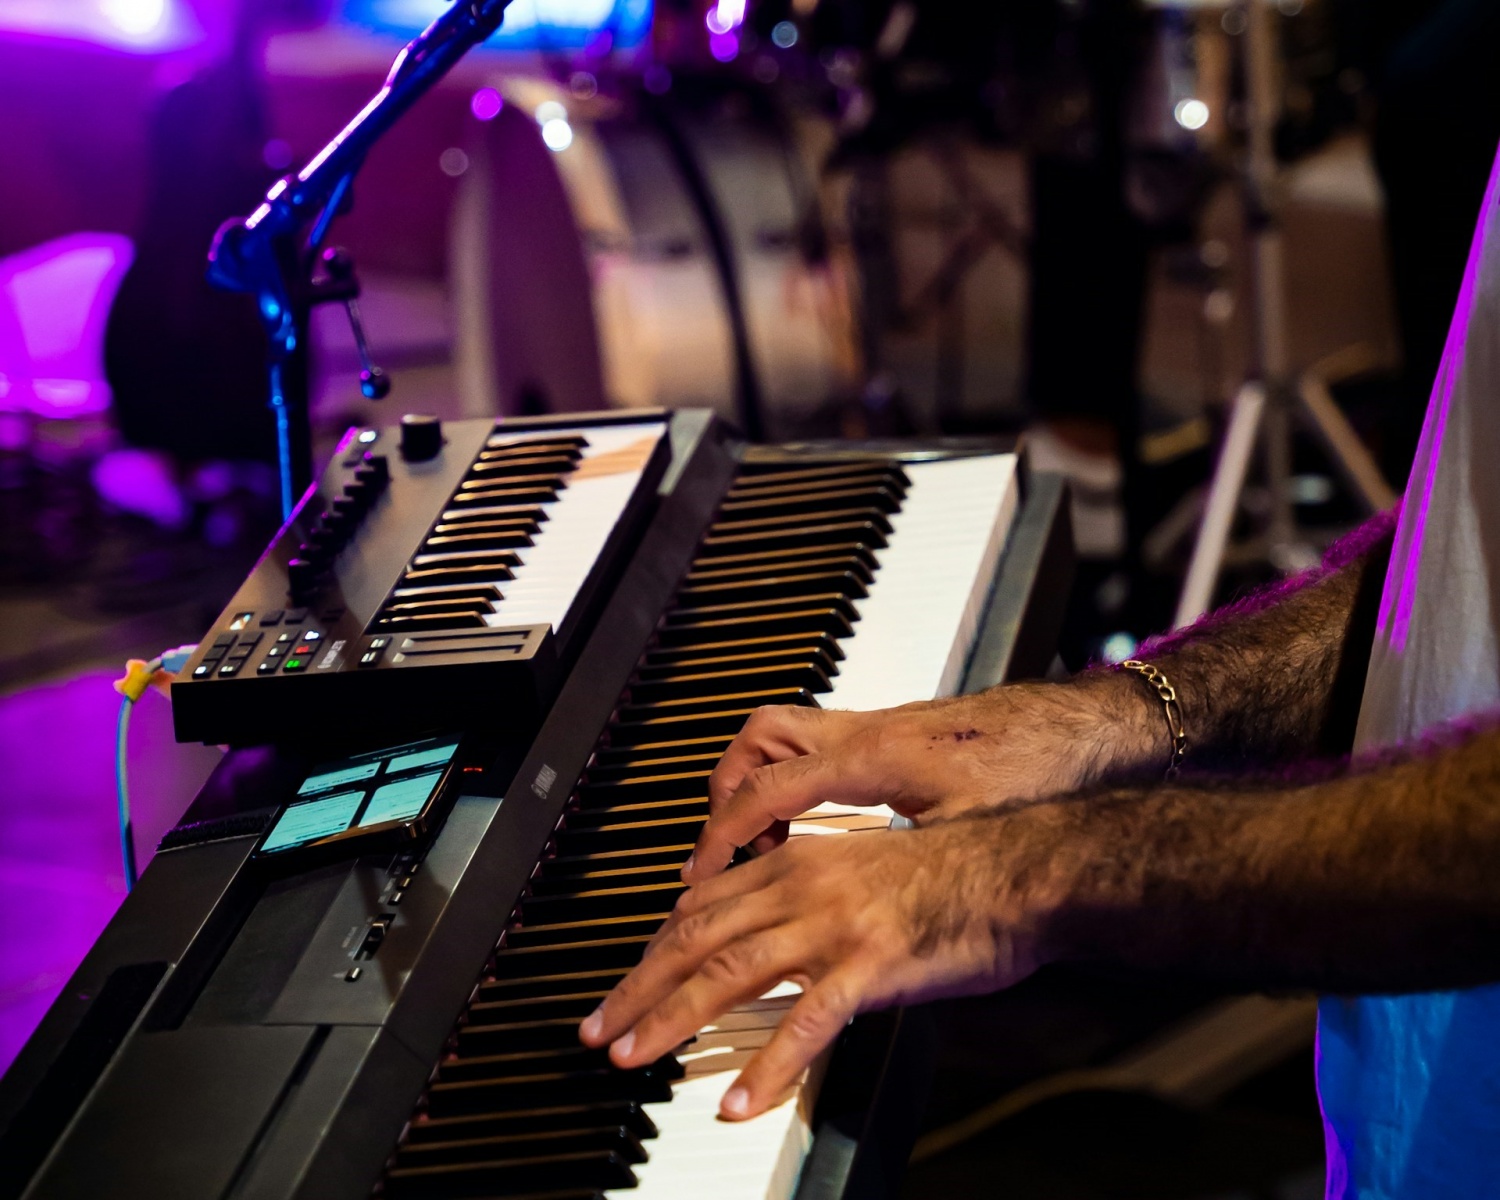 Man playing piano / synthesizer at a concert